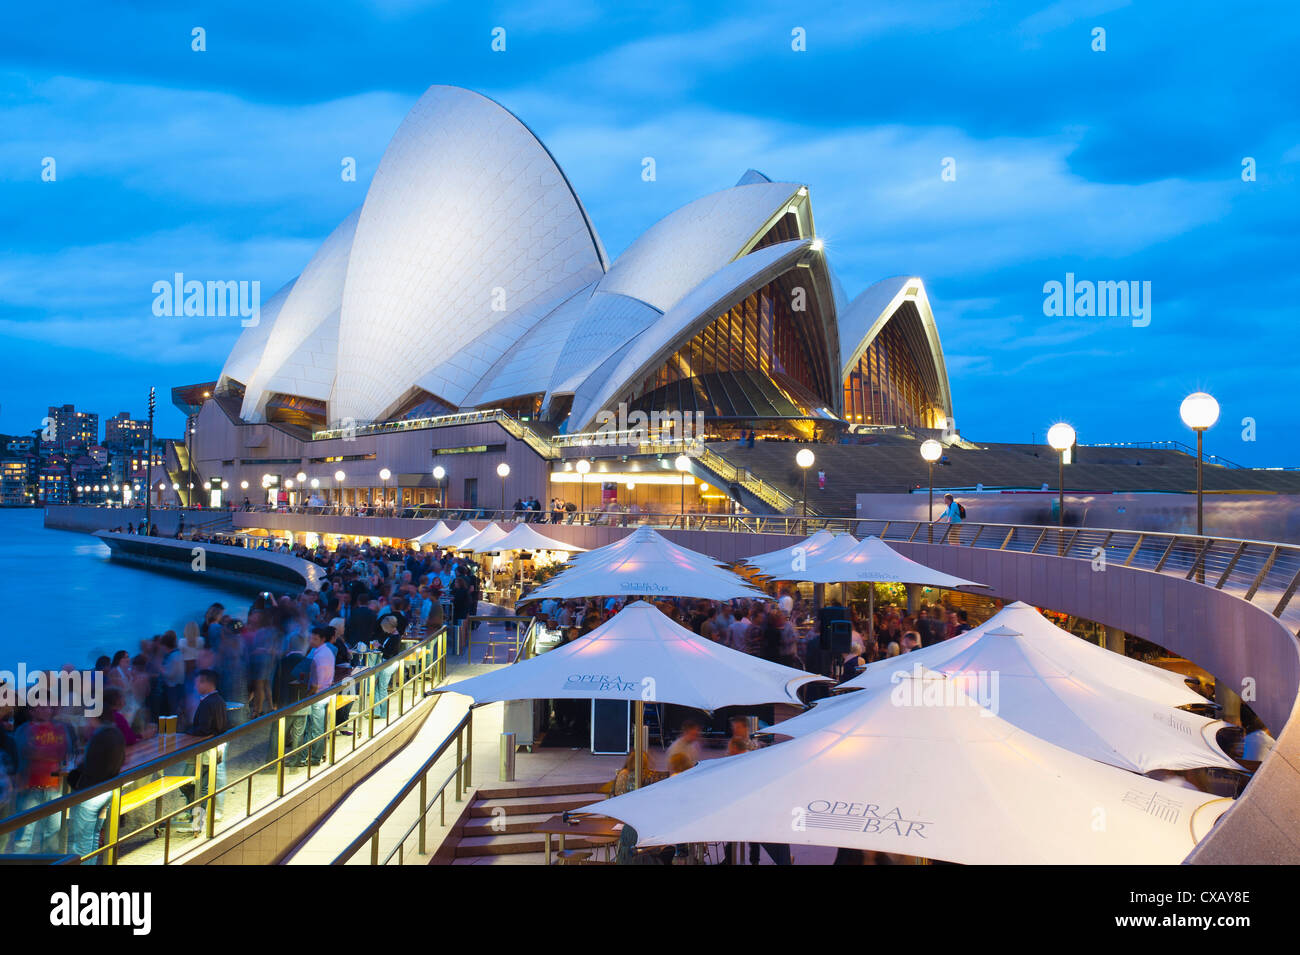 People at the Opera Bar in front of Sydney Opera House, UNESCO World Heritage Site, at night, Sydney, New South Wales, Australia Stock Photo